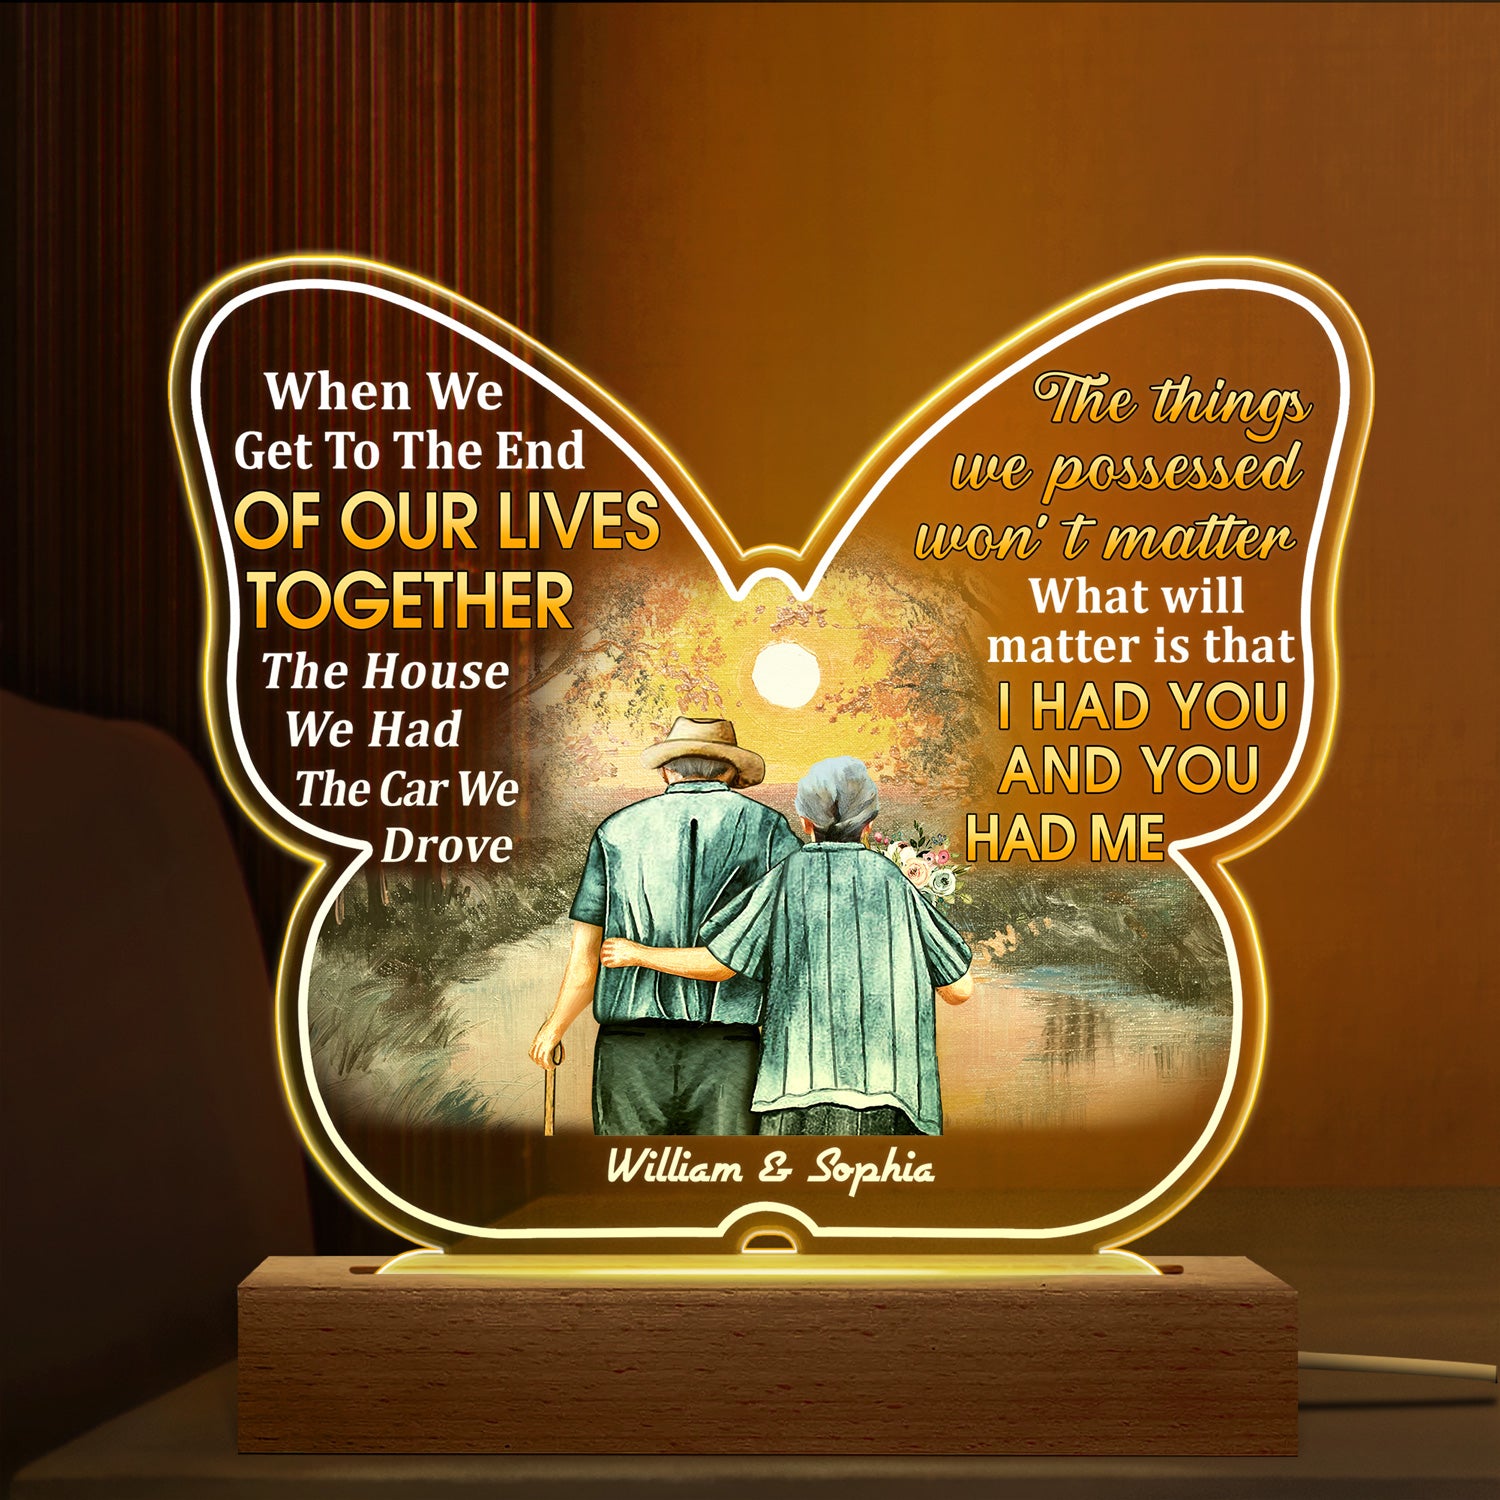 When You Get To The End Family Old Couples - Home Decor, Memorial, Anniversary, Birthday Gift For Spouse, Husband, Wife - Personalized Custom 3D Led Light Wooden Base